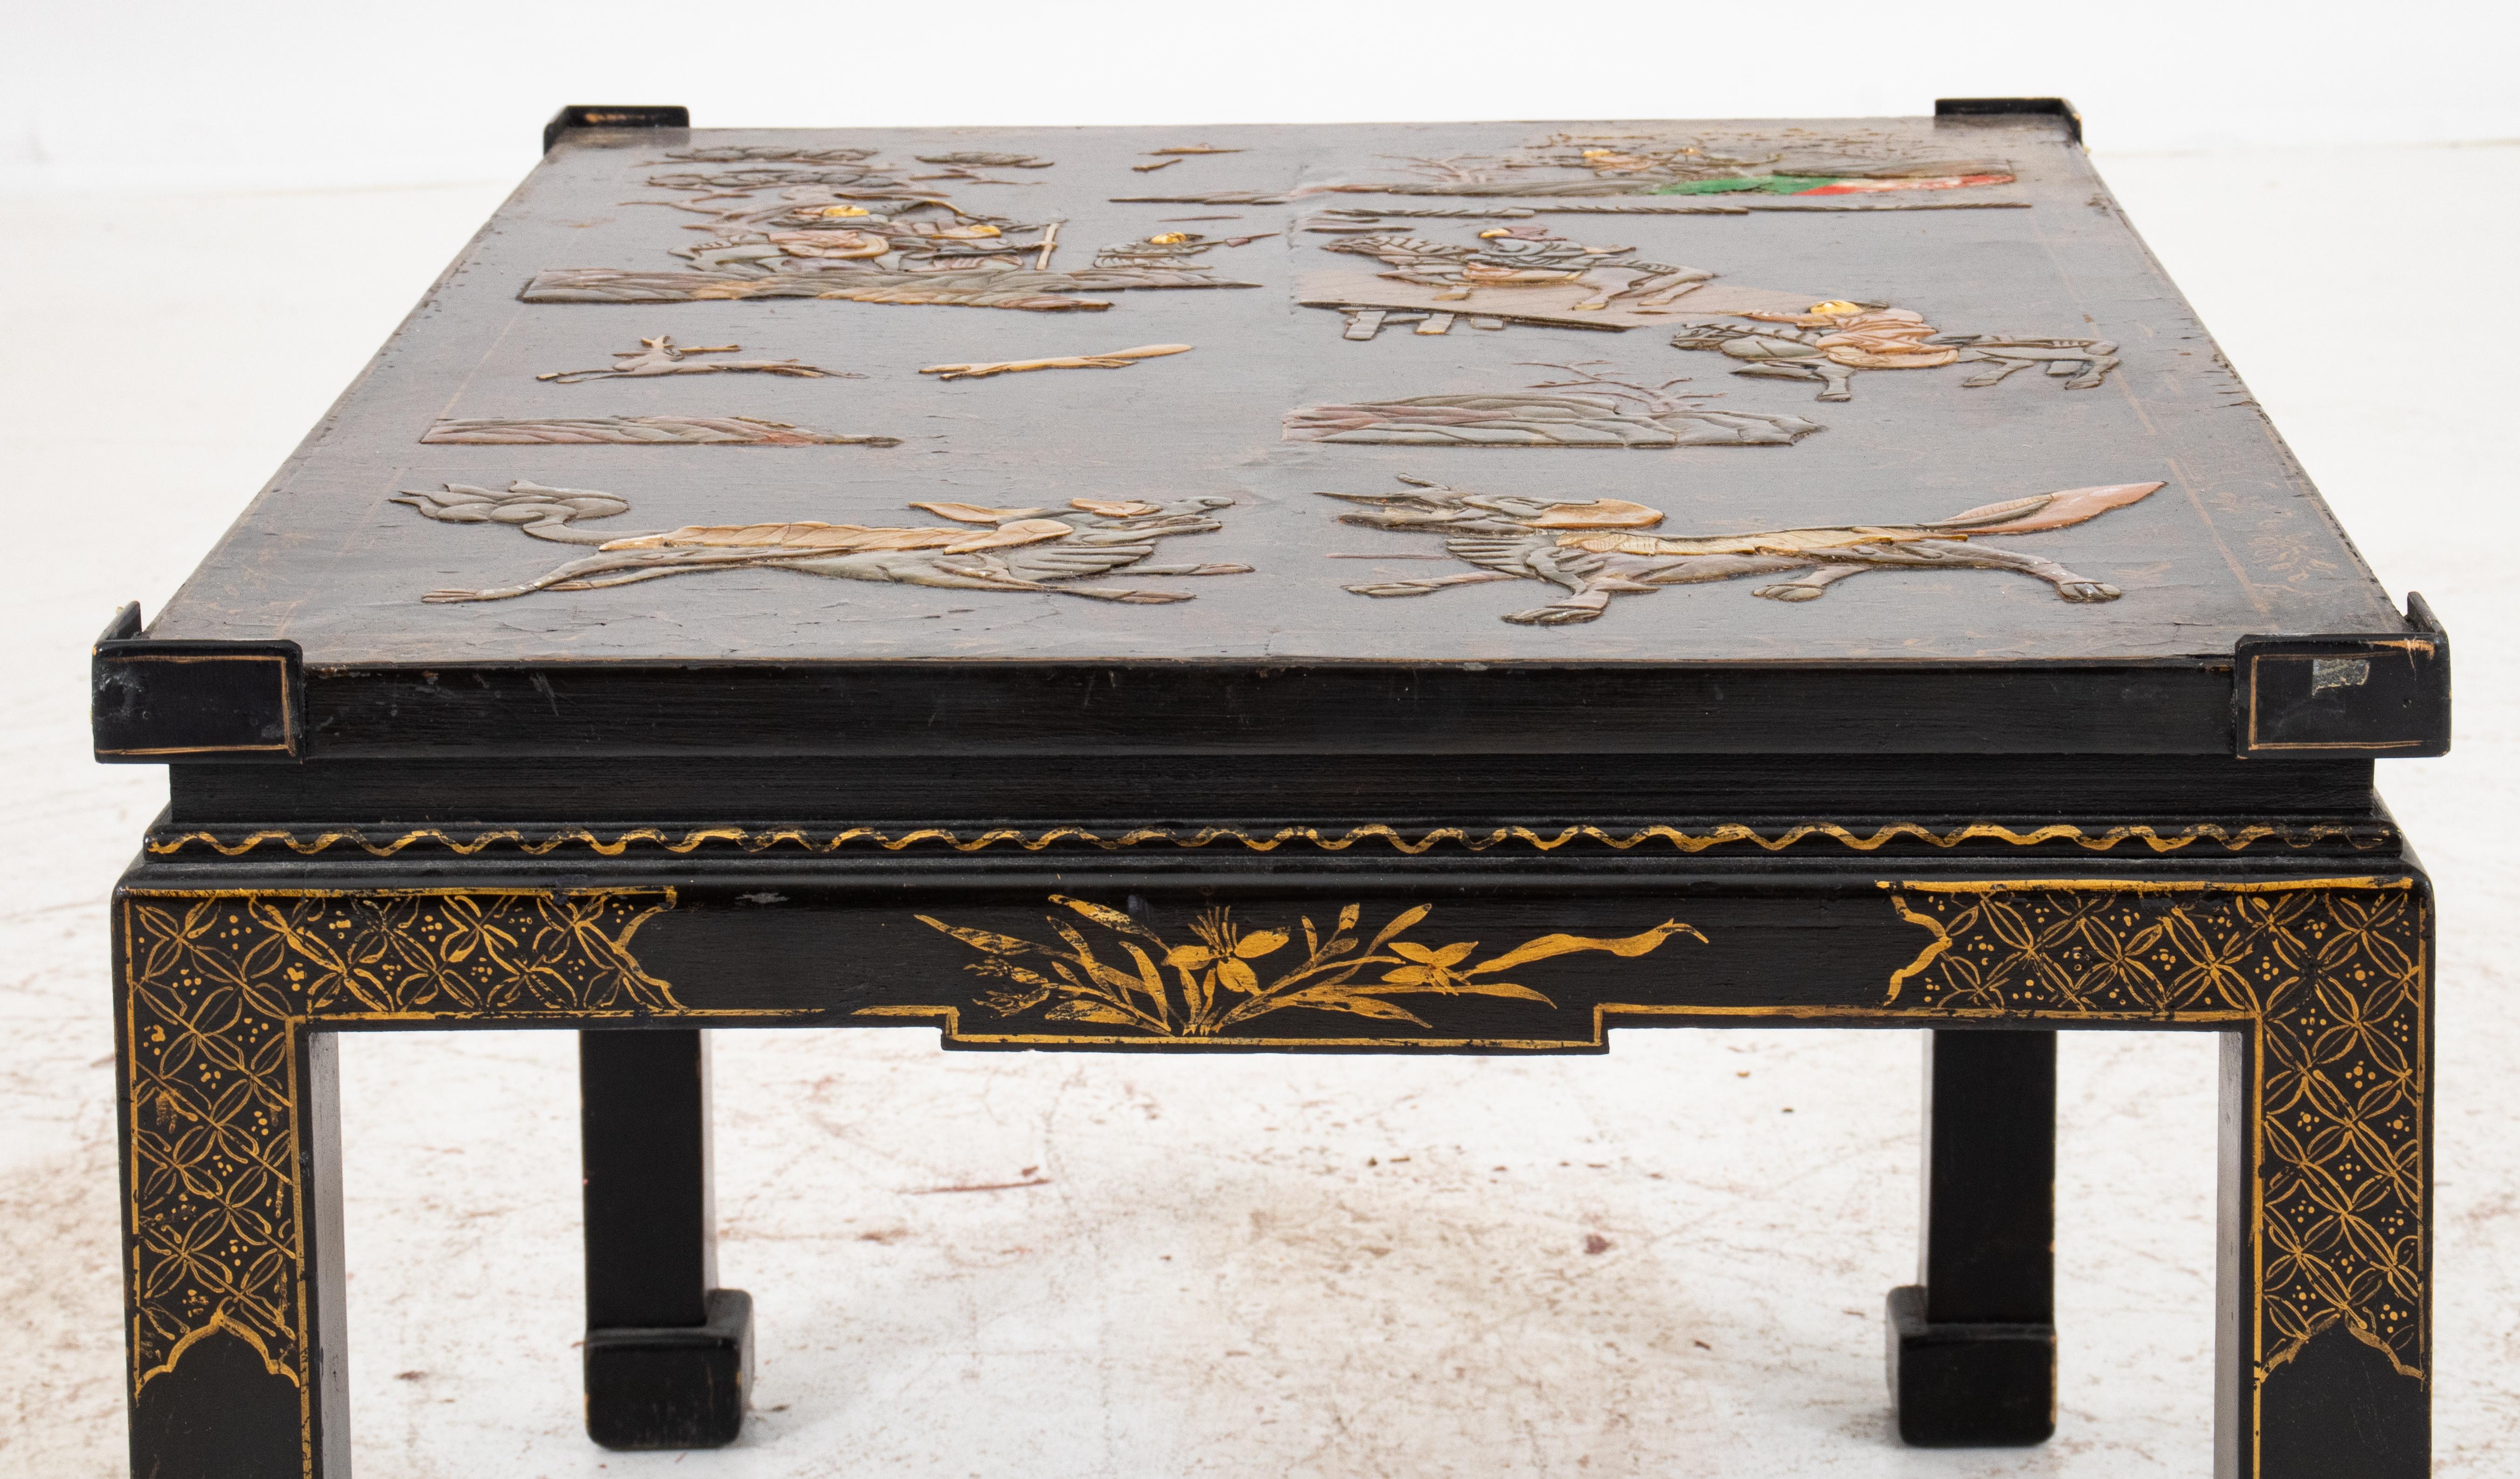 Chinese Hardstone Inlaid Panel Mounted as a Table 1